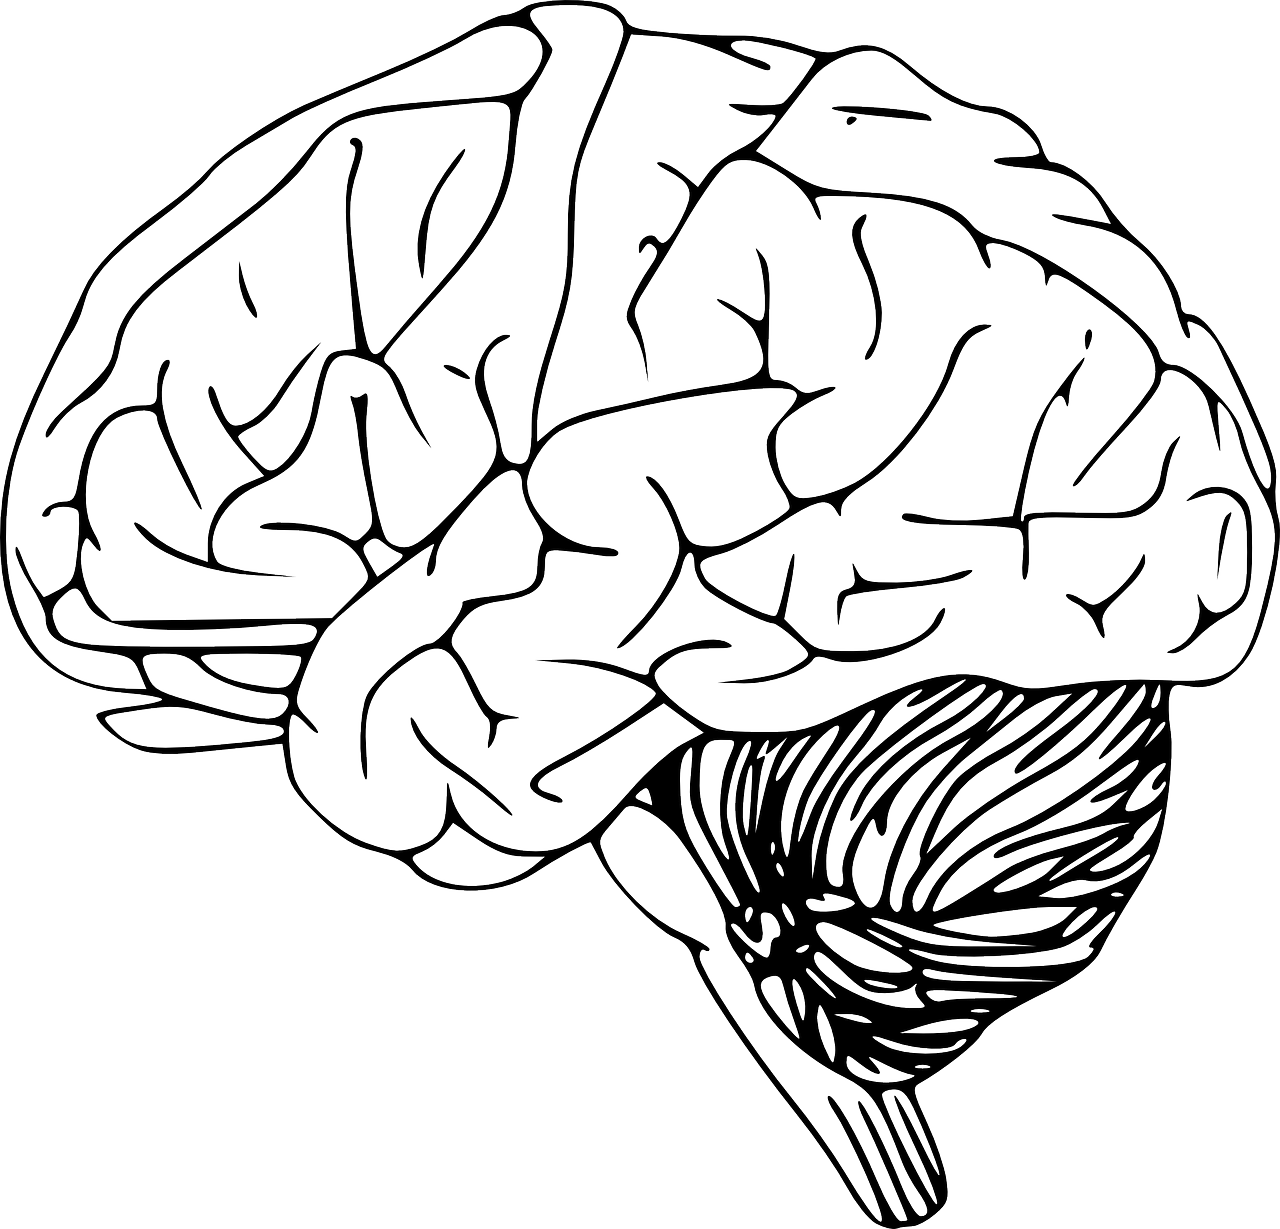 a black and white drawing of a brain, an illustration of, hurufiyya, line vector art, half body photo, full body profile, intelligent man